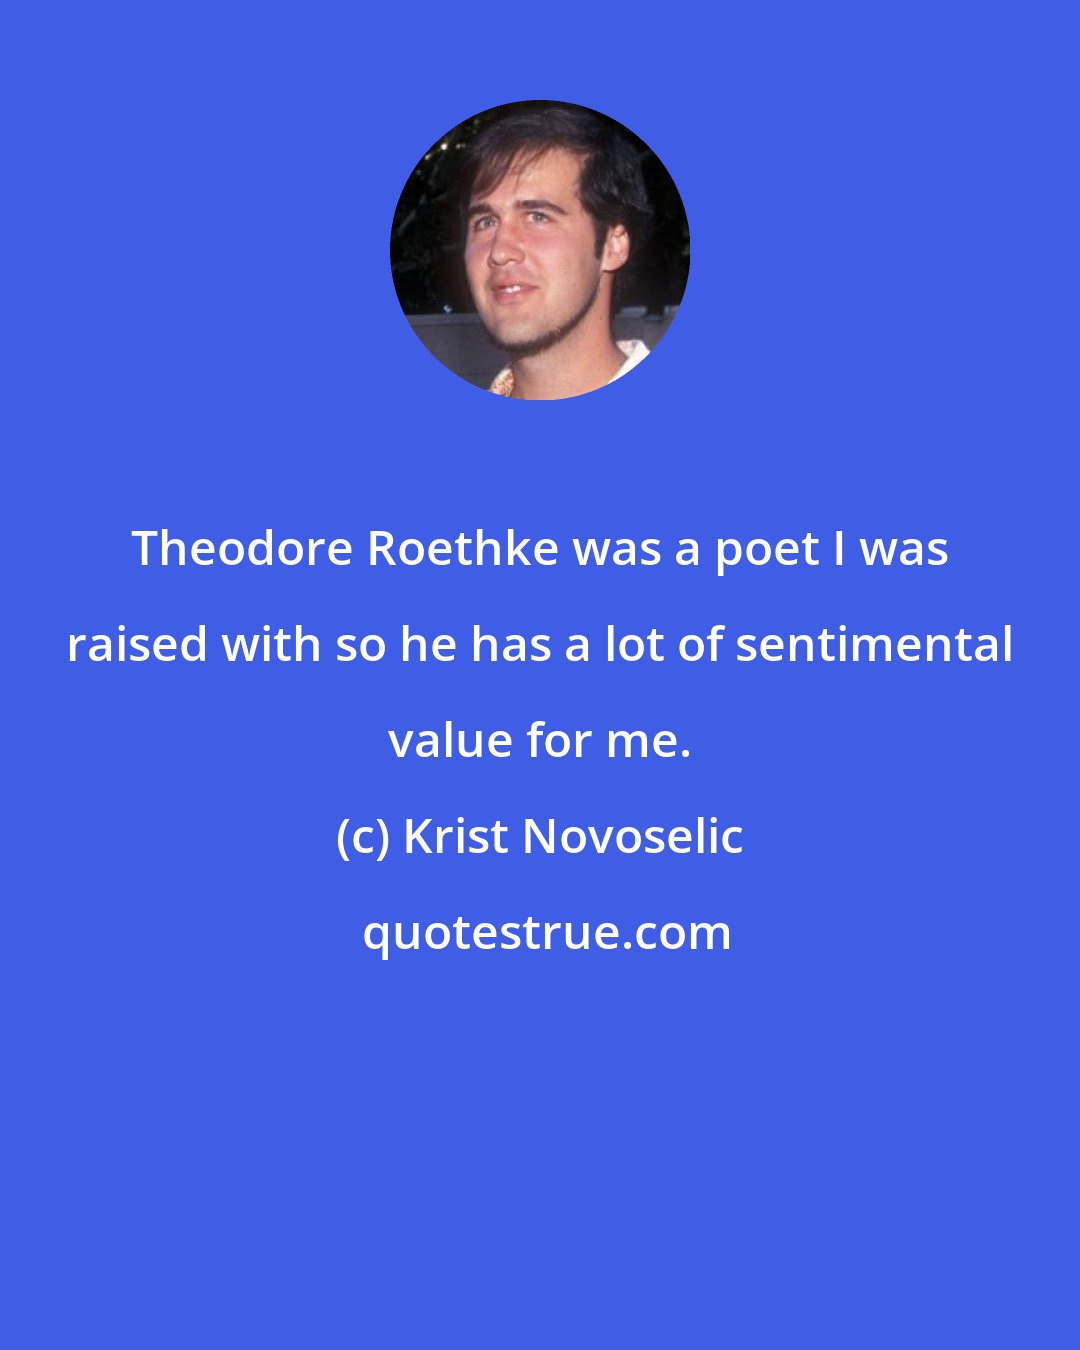 Krist Novoselic: Theodore Roethke was a poet I was raised with so he has a lot of sentimental value for me.